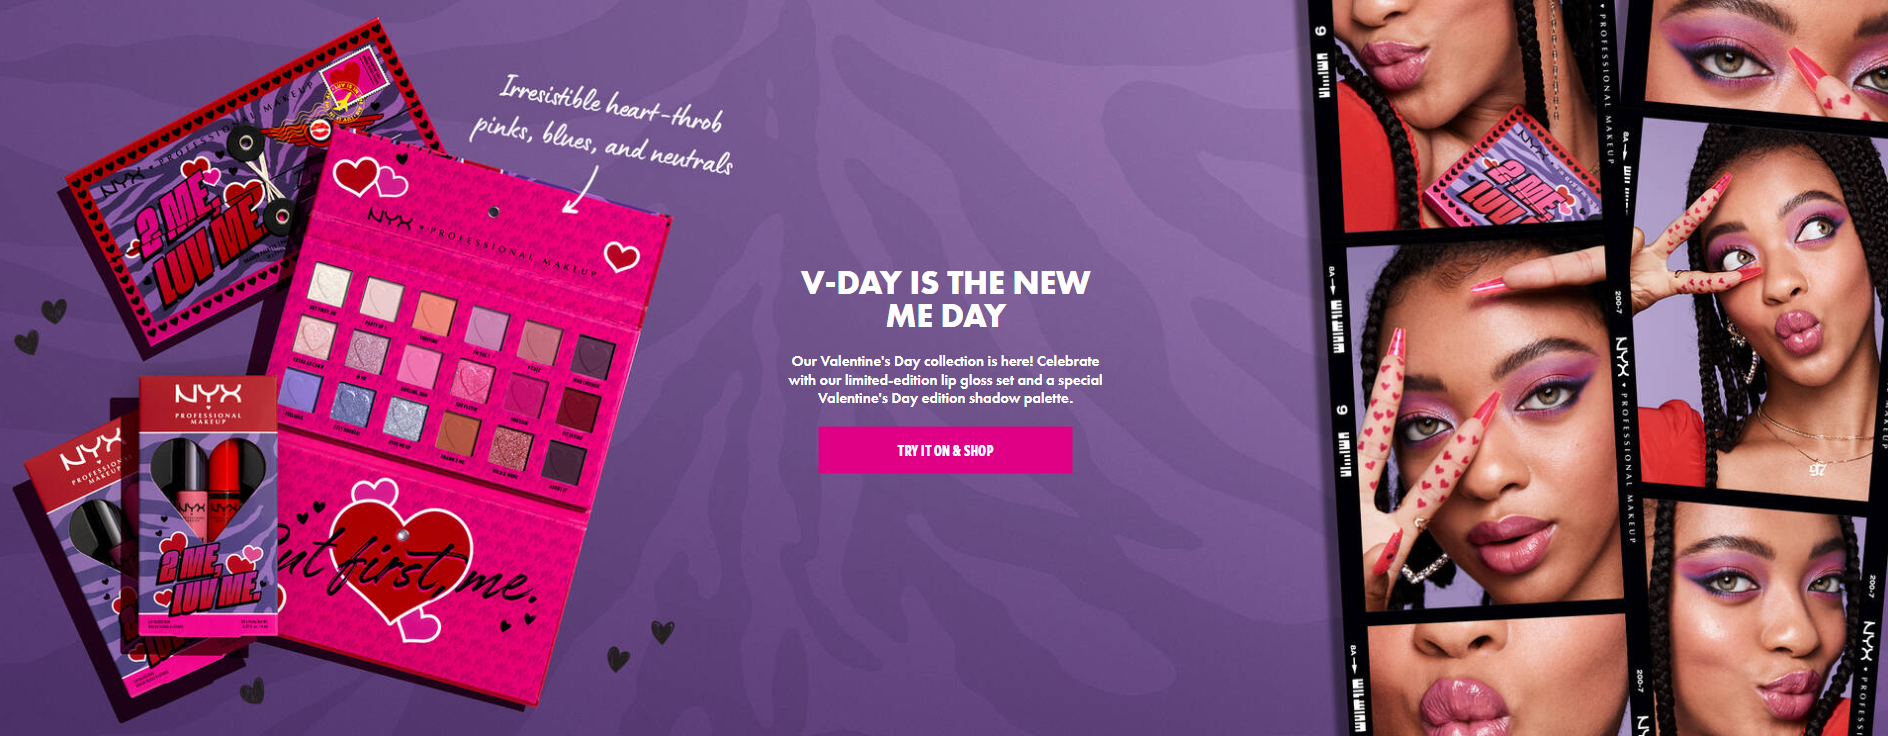 Valentine Day campaign example